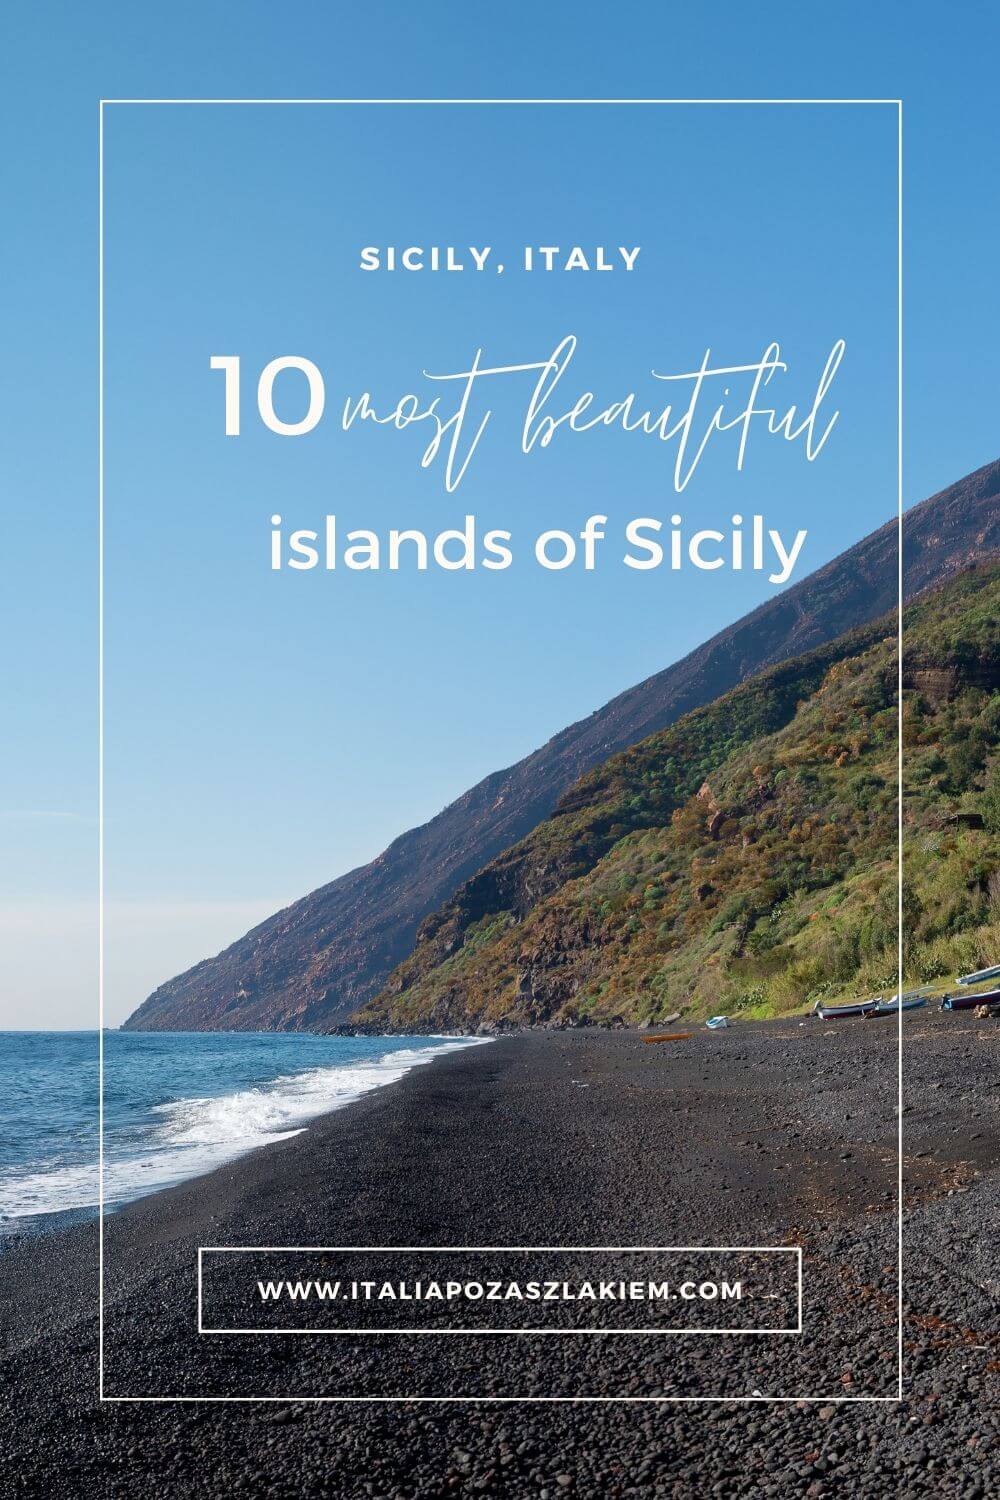 10 Most beautiful islands of Sicily